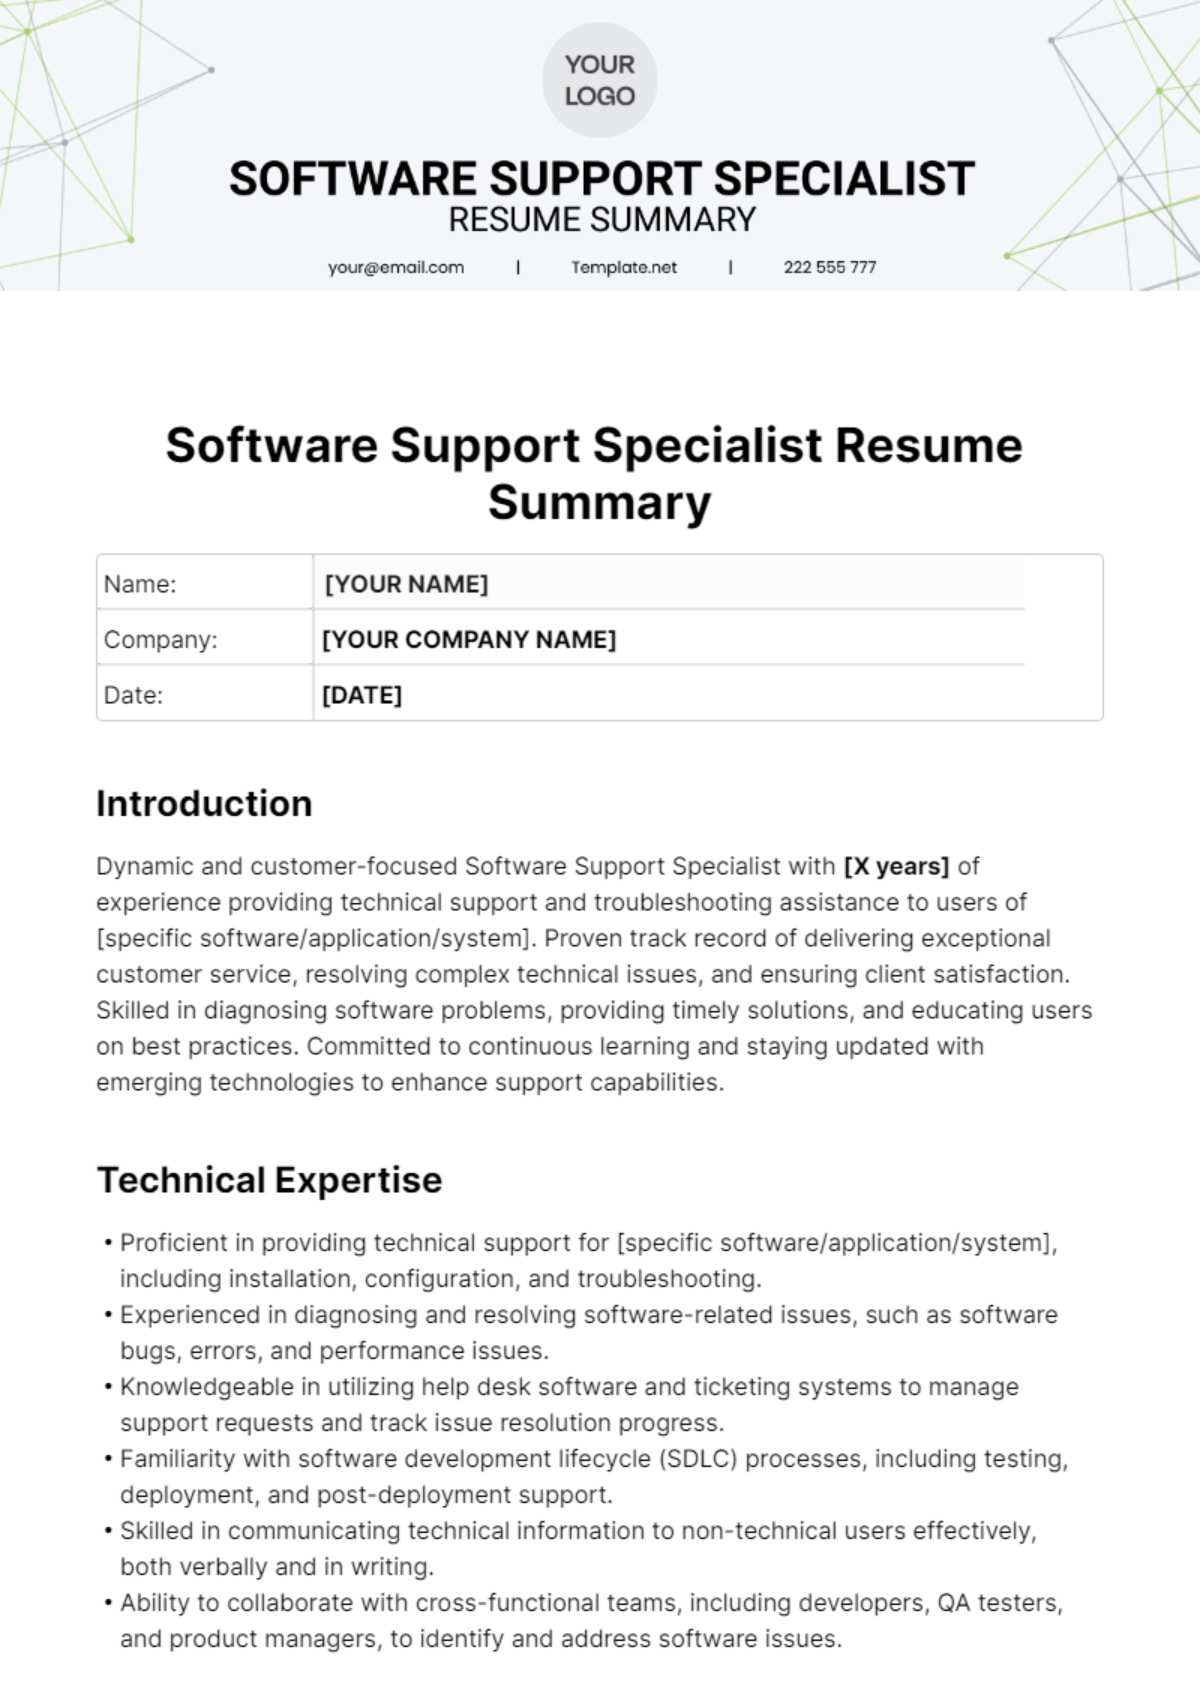 Software Support Specialist Resume Summary Template 